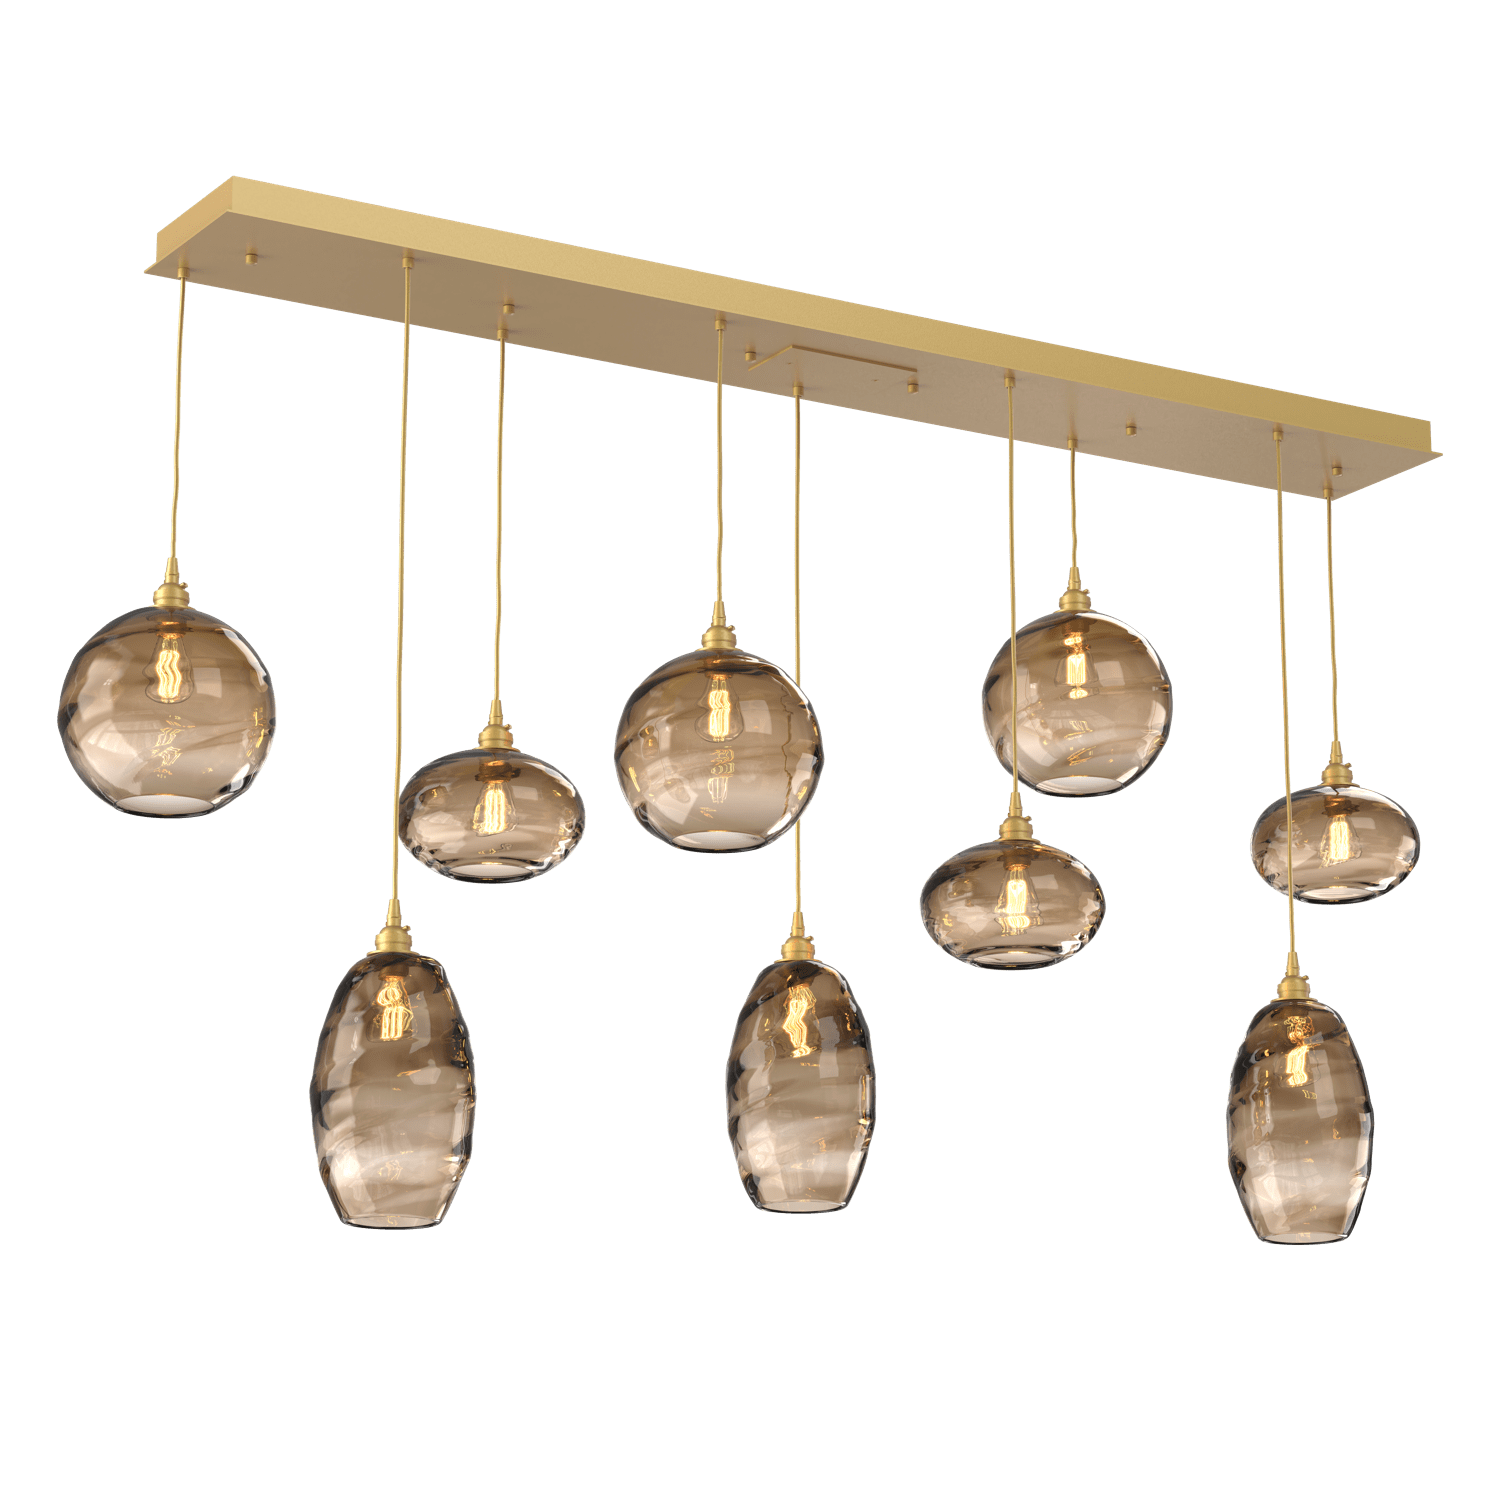 PLB0048-09-GB-OB-Hammerton-Studio-Optic-Blown-Glass-Misto-9-light-linear-pendant-chandelier-with-gilded-brass-finish-and-optic-bronze-blown-glass-shades-and-incandescent-lamping